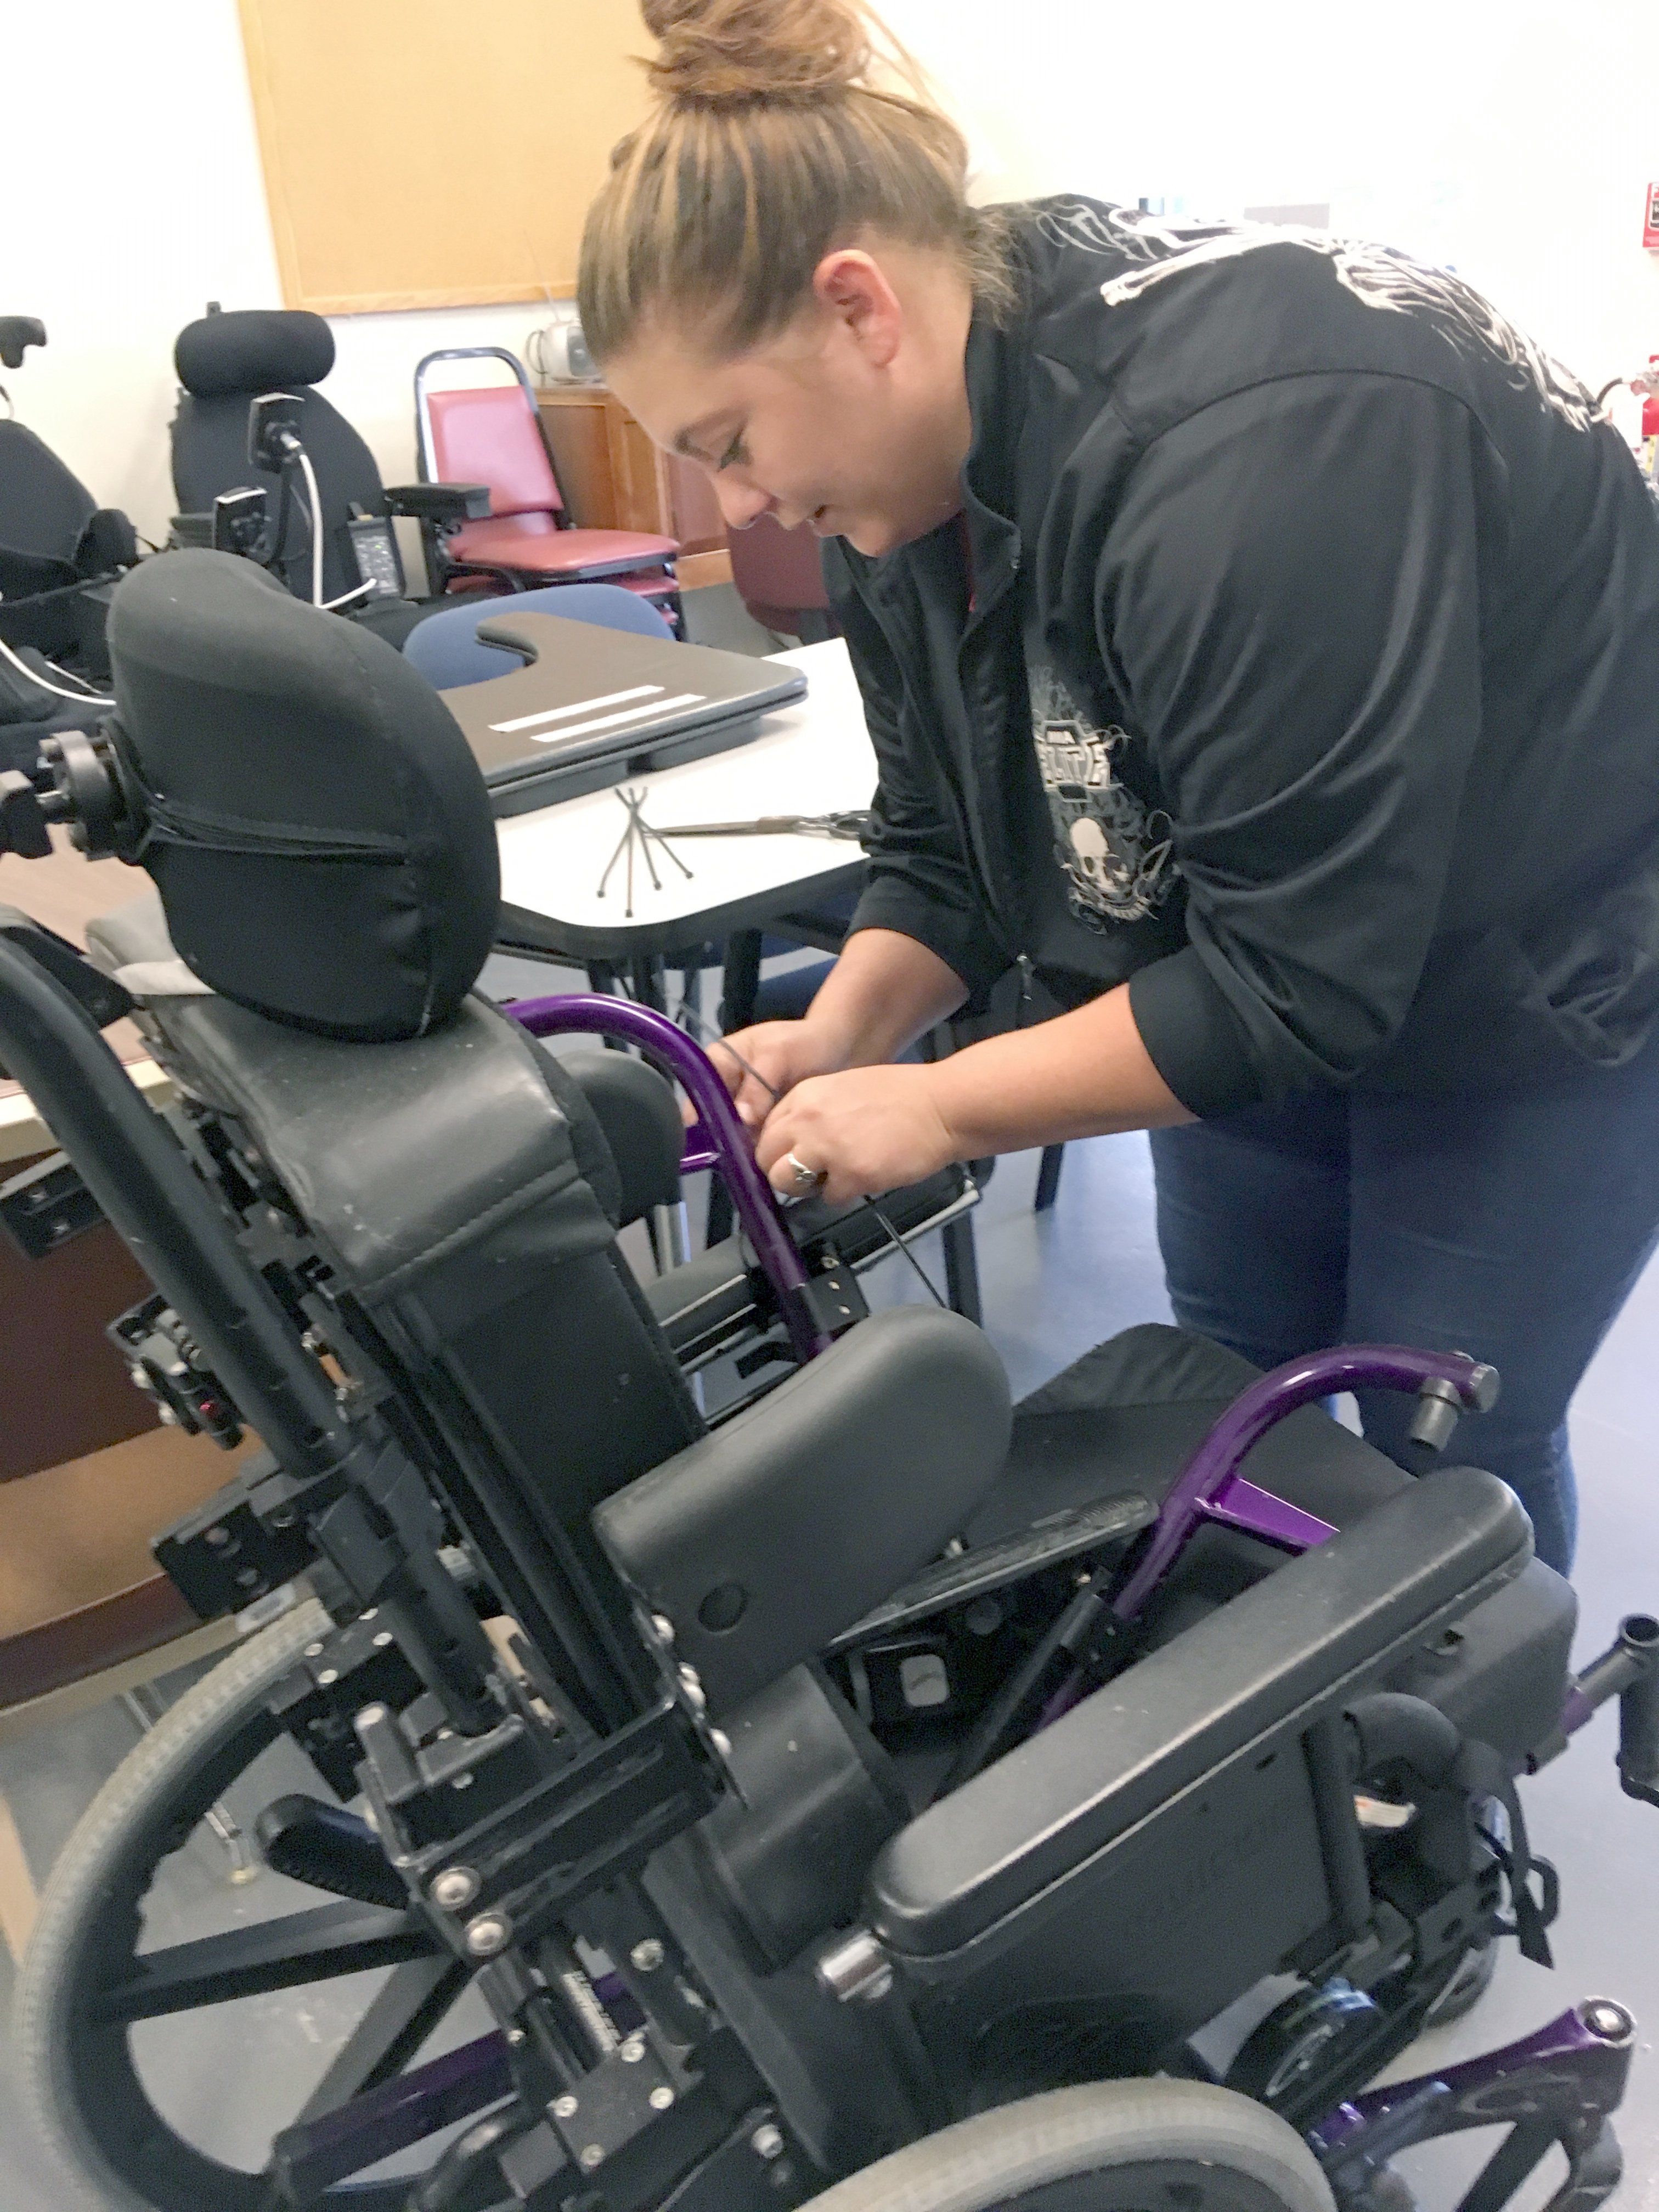 A woman works on a pediatric wheelchair in a room of equipment